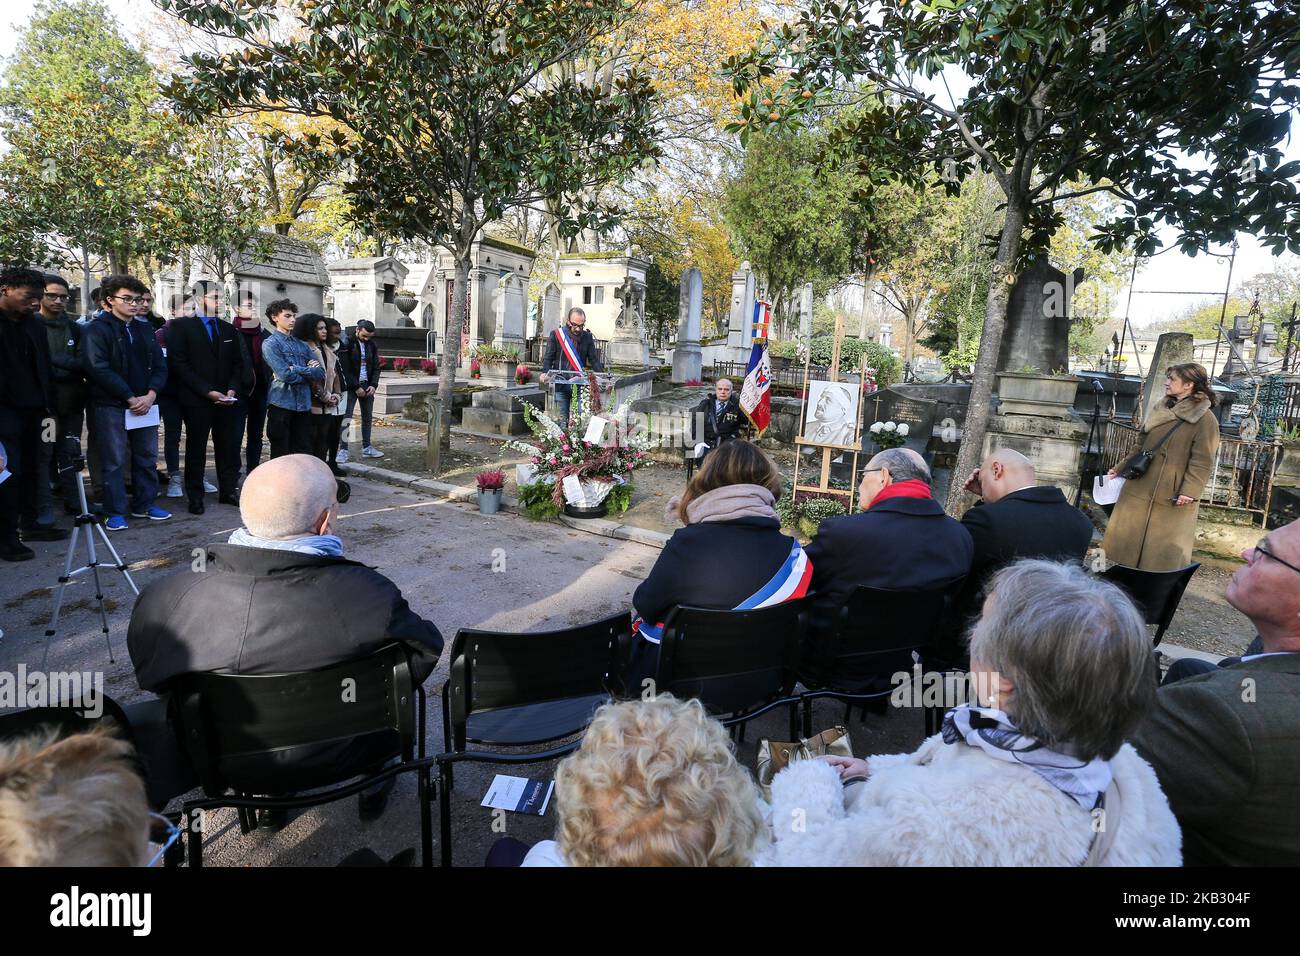 An elected official is speaking near the French poet Guillaume Apollinaire’s portrait during a ceremony held on Novembre 8, 2018, at the grave of the poet at Père Lachaise Cemetery in Paris, during the commemorative events of the 100th anniversary of the end of World War I. Naturalized as a French citizen in 1916, Guillaume Apollinaire fought at the front in Champagne as lieutenant of the 96th Infantry Regiment. Weakened from shrapnel injuries, he died just two days before the Armistice on November 9th from the Spanish flu. (Photo by Michel Stoupak/NurPhoto) Stock Photo